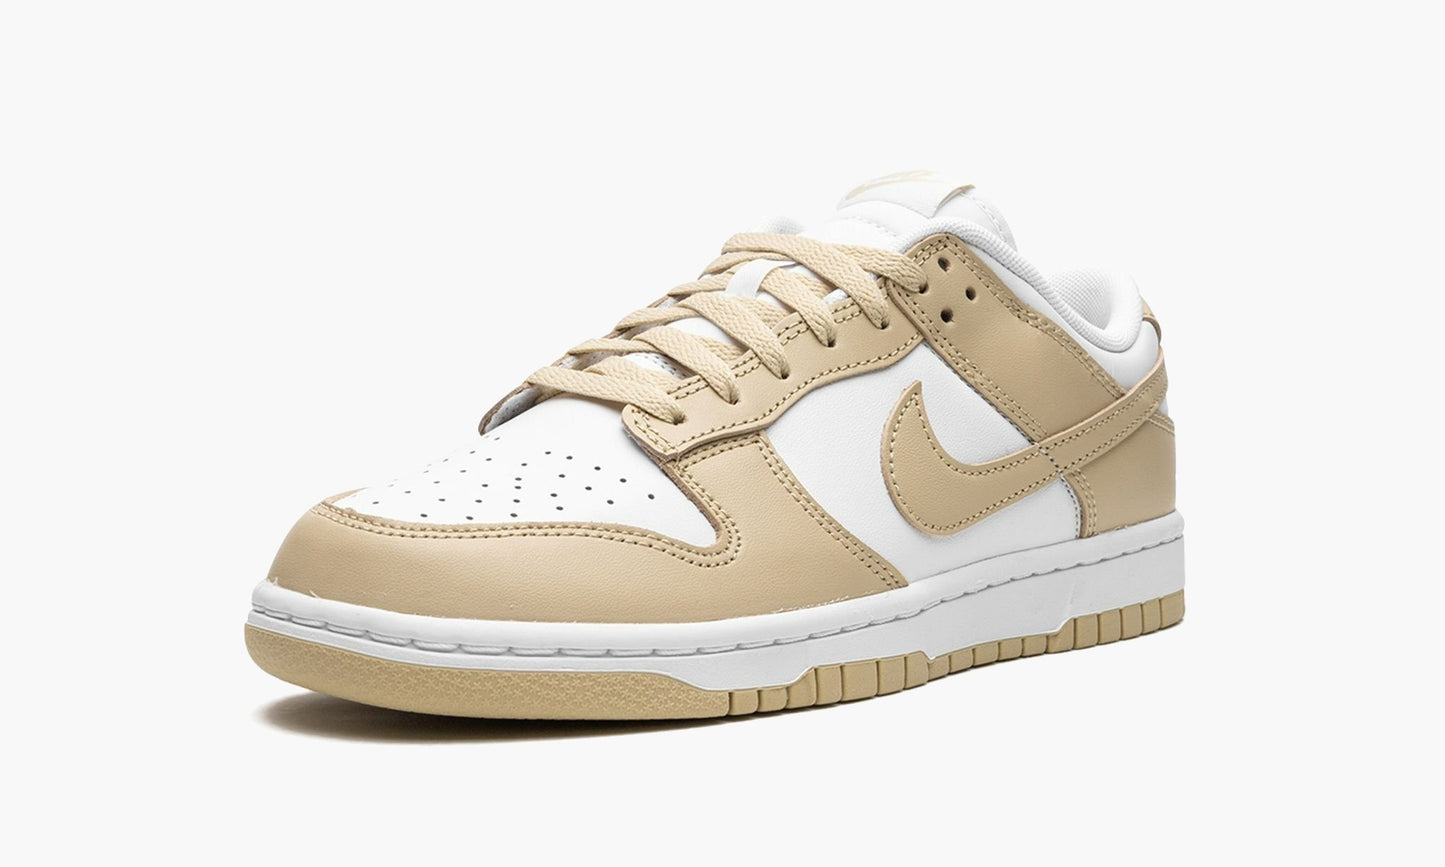 Dunk Low Team Gold - DV0833 100 | The Sortage